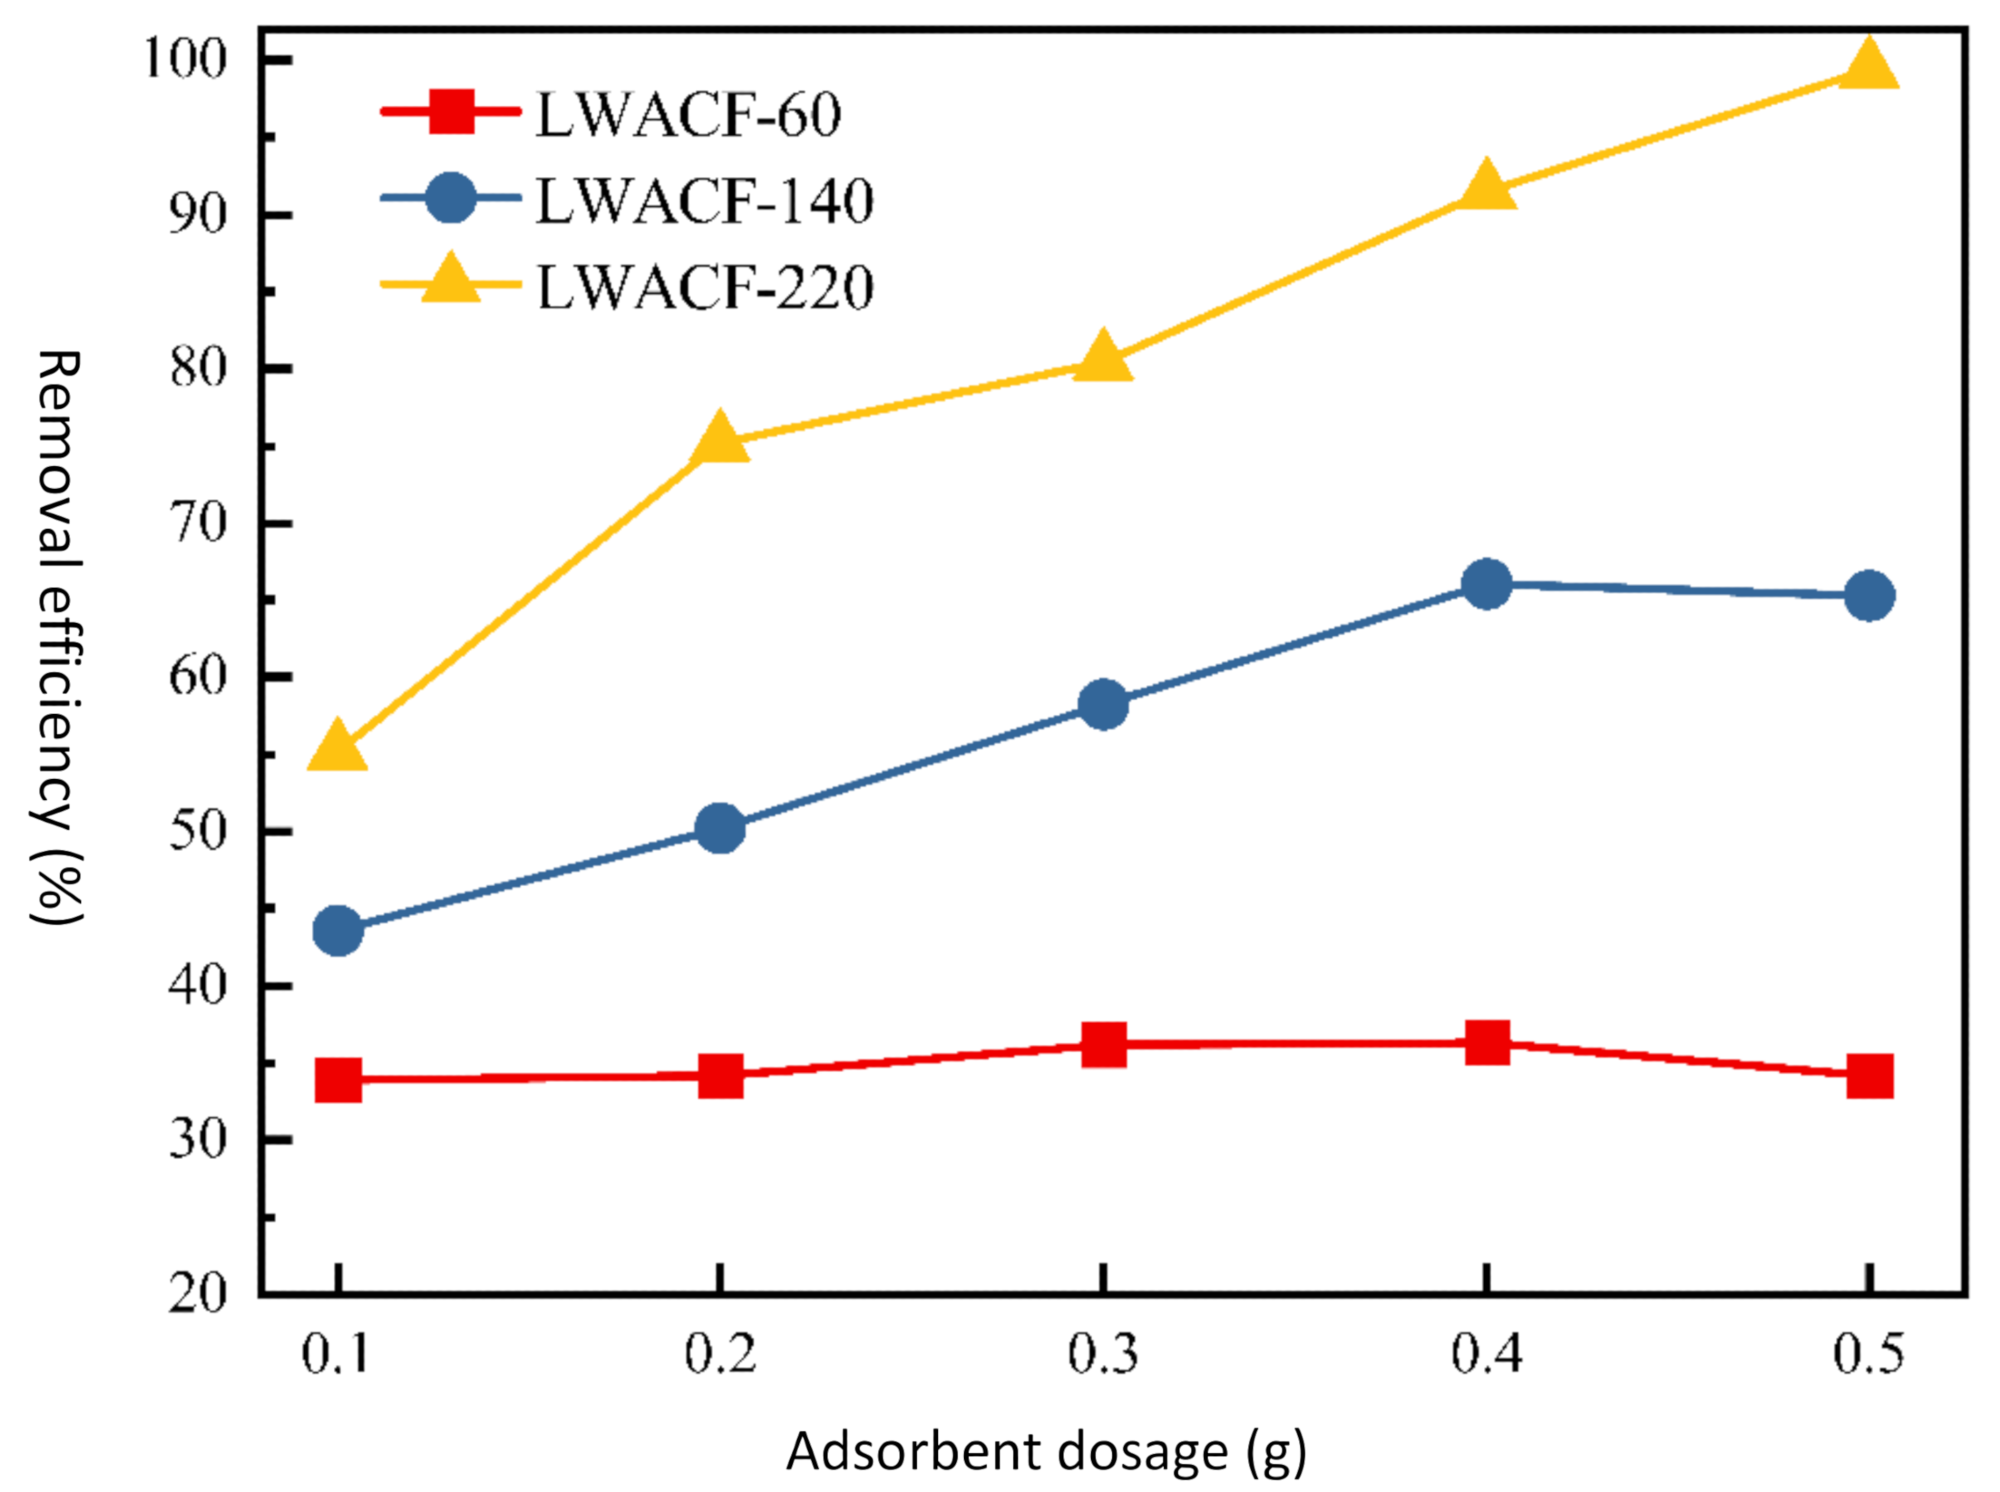 The Cu2+ removal efficiency at a constant adsorbent dose for LWACFs with different activation times at 800°C.